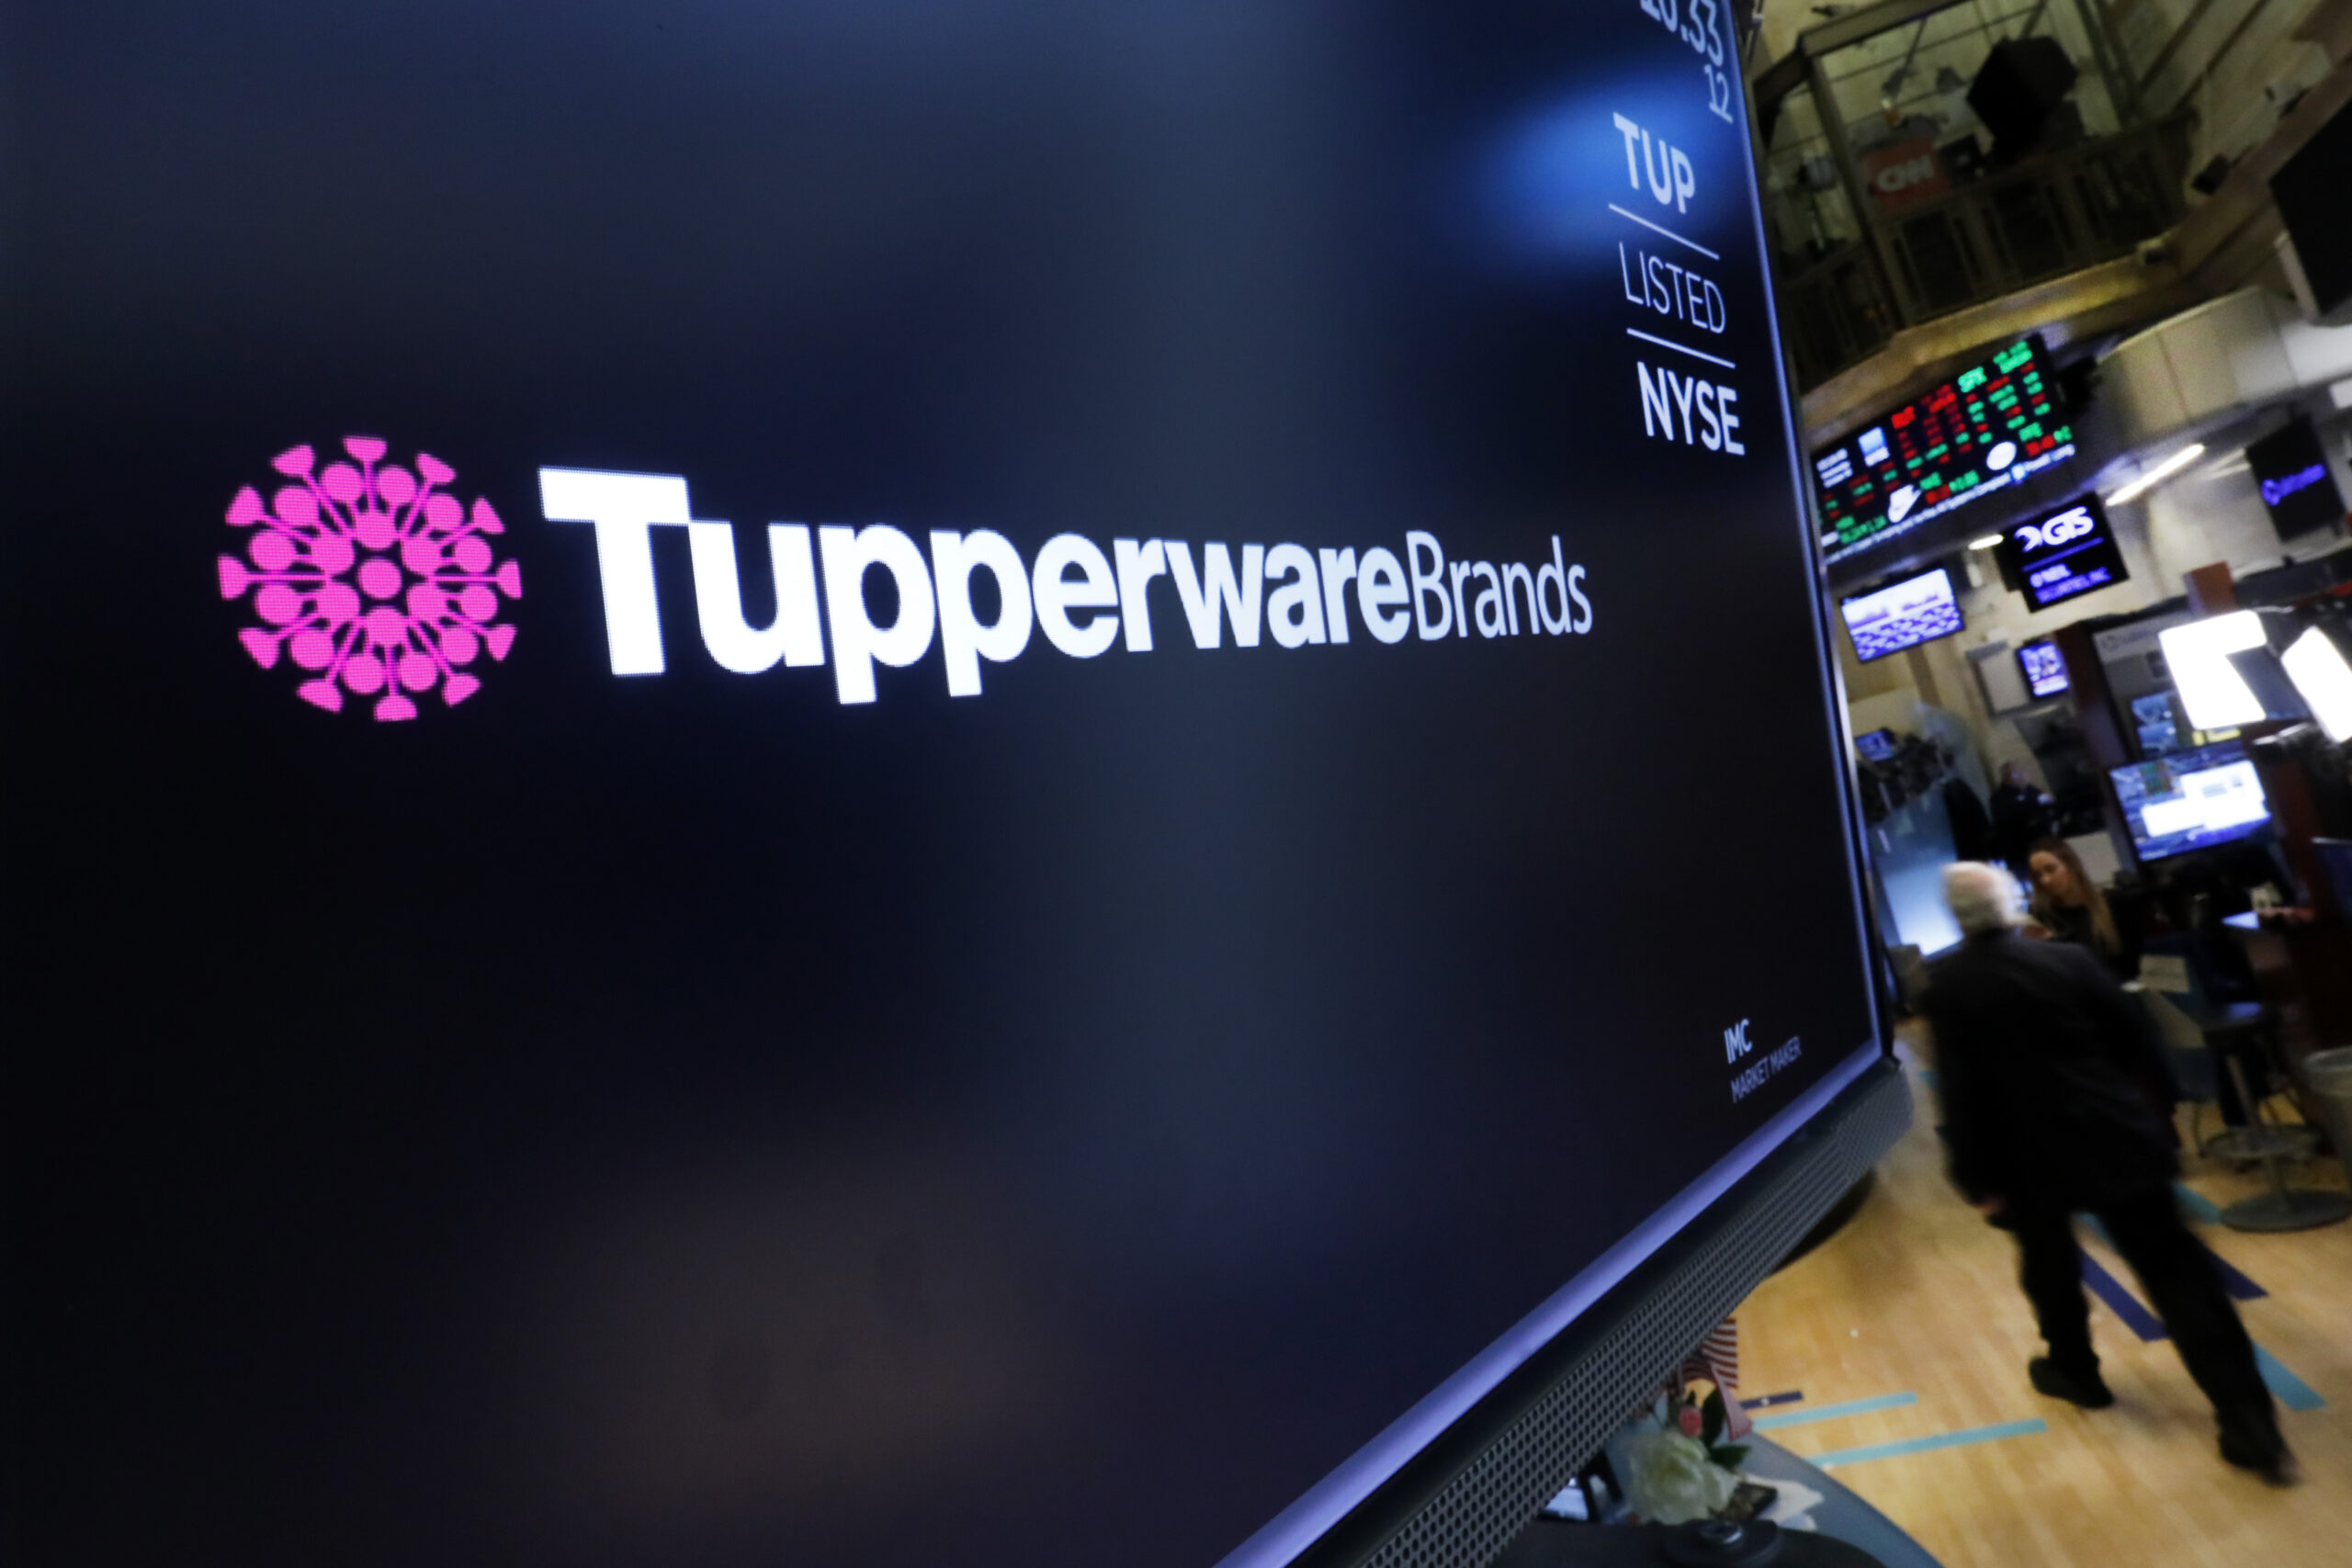 FILE - In this Oct. 30, 2019 file photo, the logo for Tupperware Brands appears above a trading post on the floor of the New York Stock Exchange. Tupperware Brands, on Wednesday, Oct. 28, 2020, posted third quarter profit of $34.4 million, more than quadruple the $7.8 million from the same quarter a year ago. (AP Photo/Richard Drew)